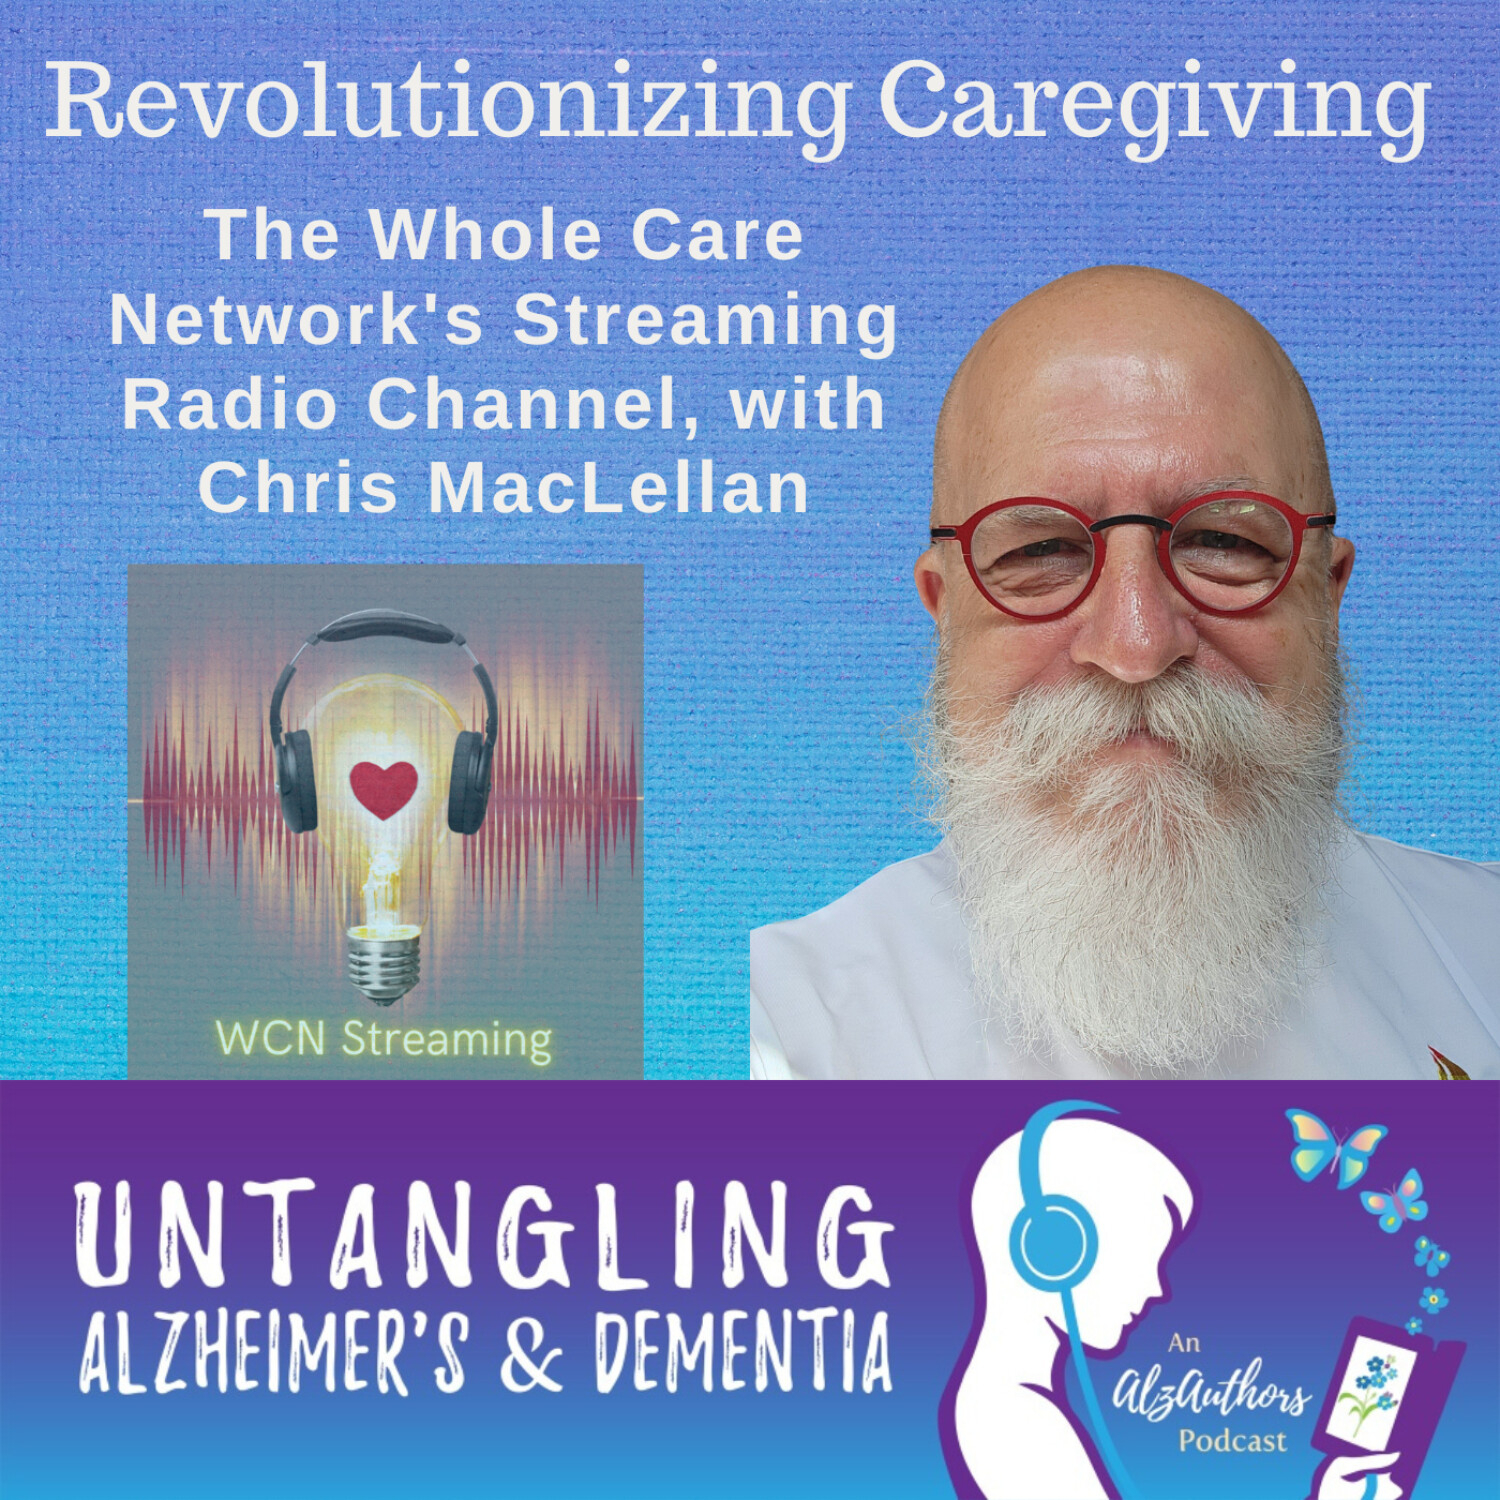 Revolutionizing Caregiving: The Whole Care Network’s Streaming Radio Channel, with Chris MacLellan